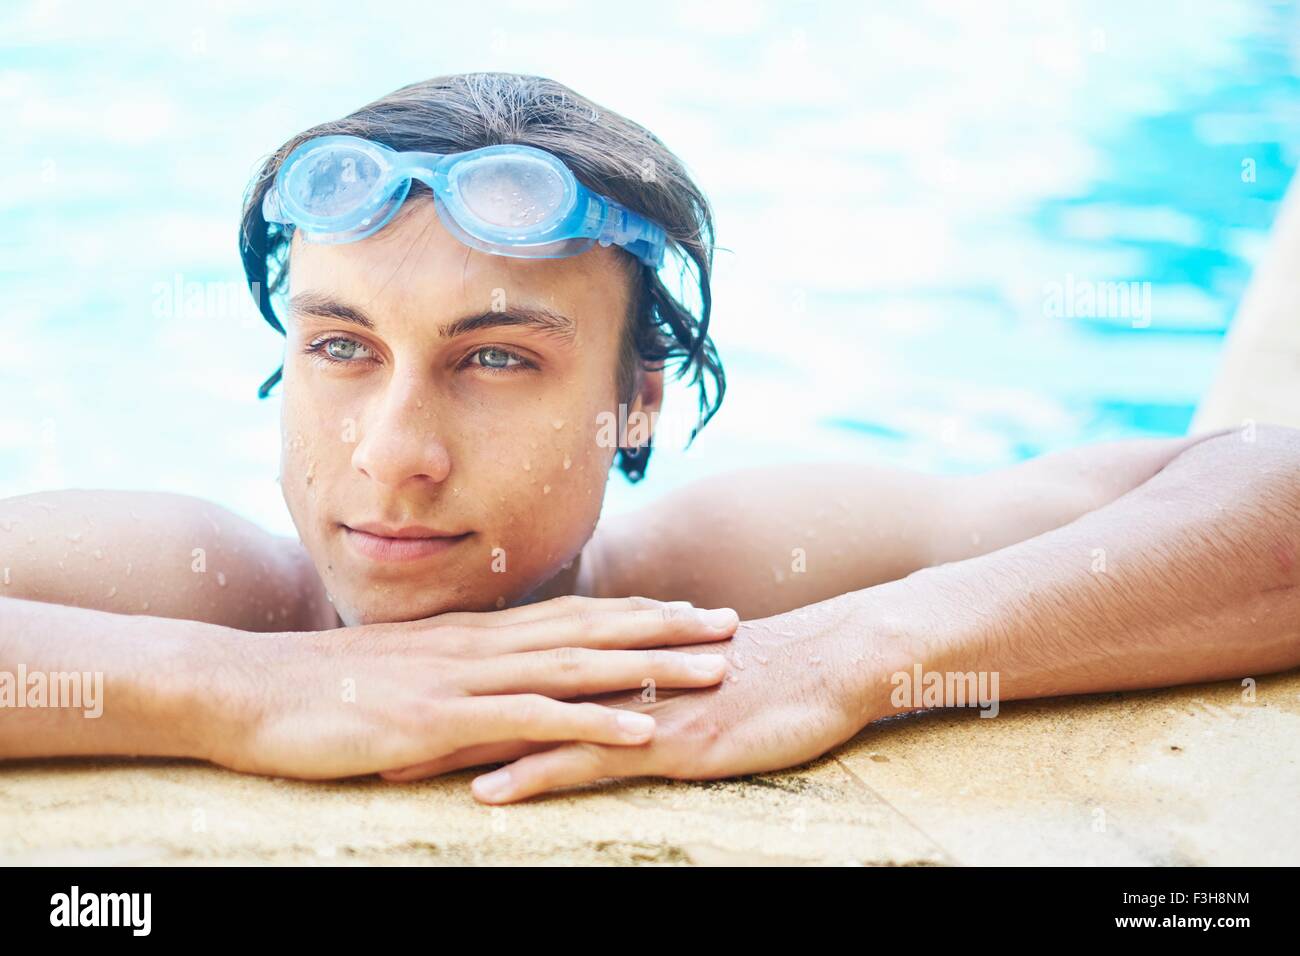 Portrait of young man with wet hair in swimming pool Stock Photo